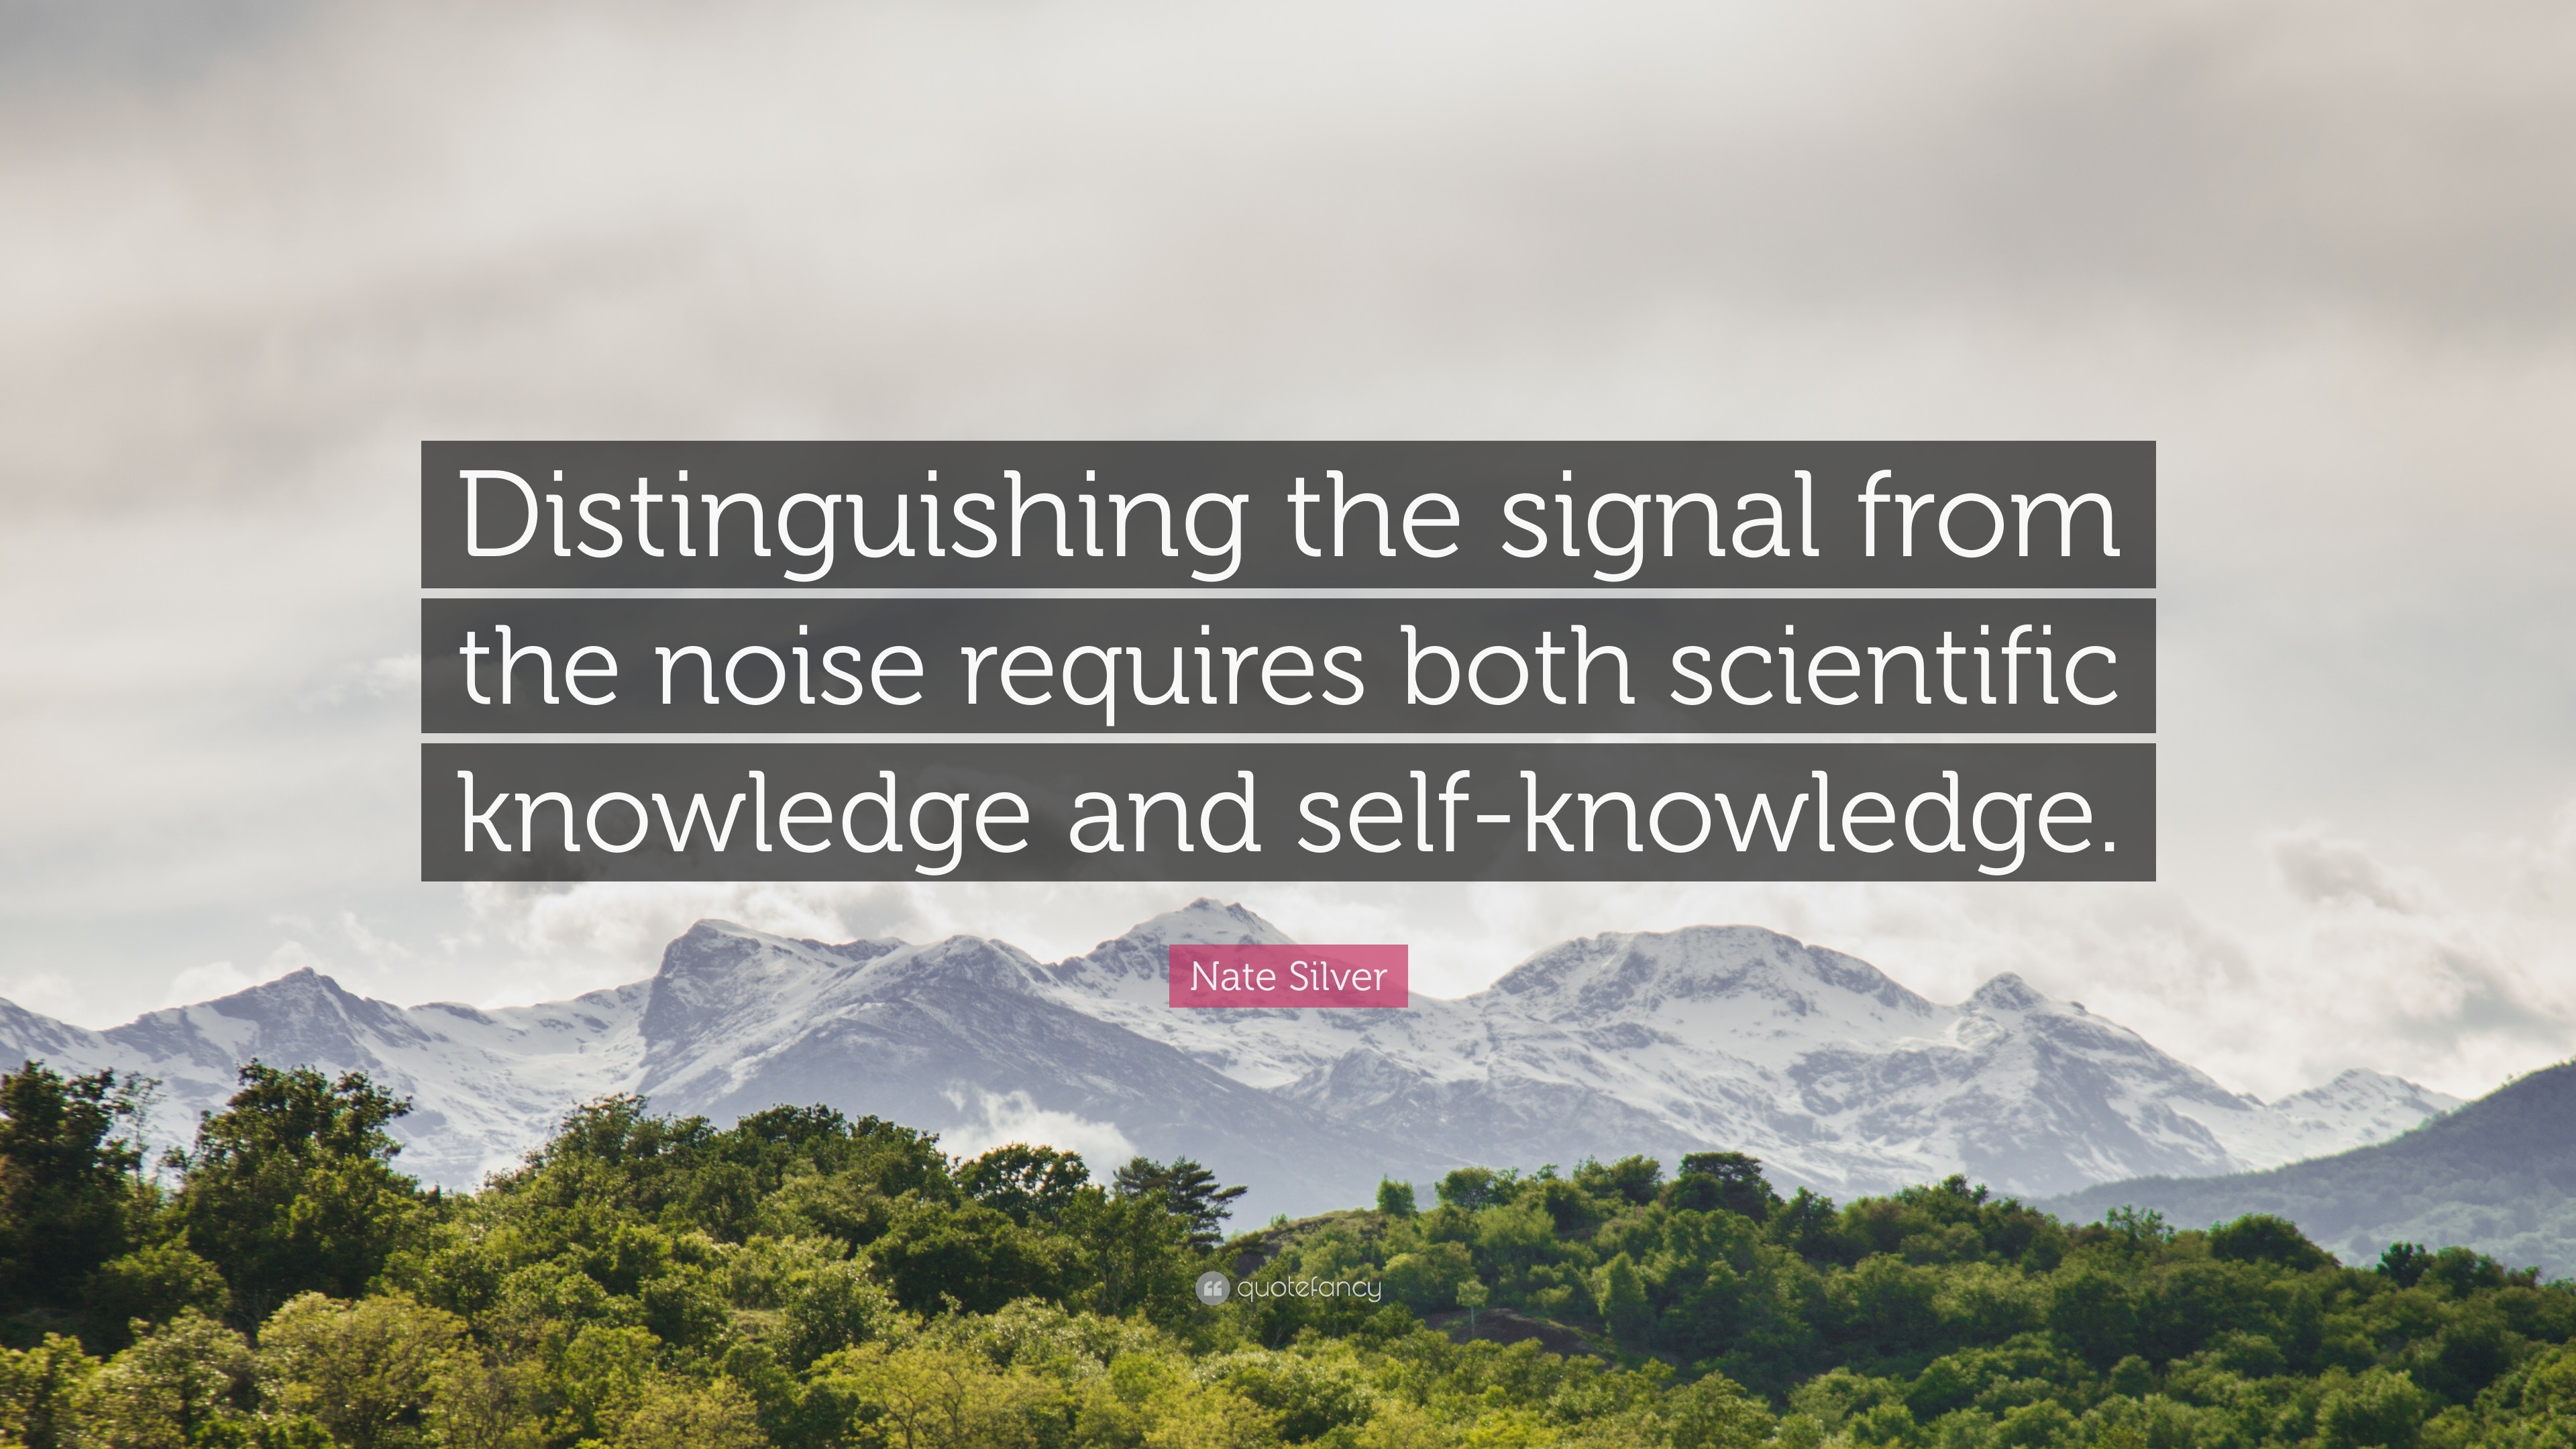 https://quotefancy.com/media/wallpaper/3840x2160/1094857-Nate-Silver-Quote-Distinguishing-the-signal-from-the-noise.jpg